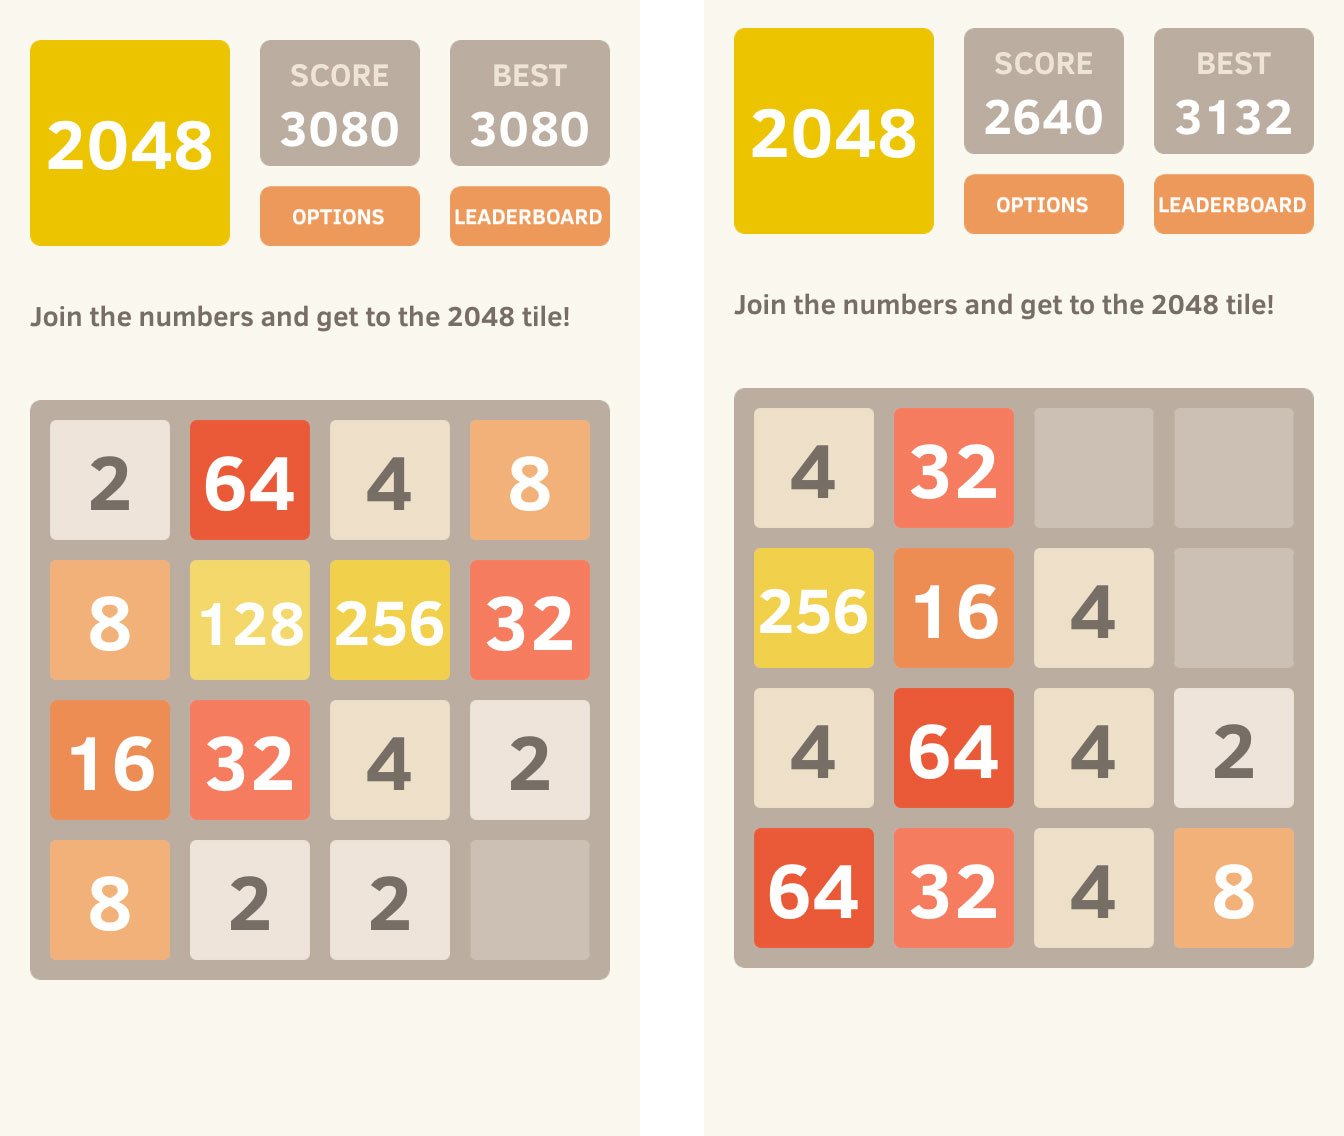 Six Tips And Tricks To Help You Achieve Your Highest Score In 2048